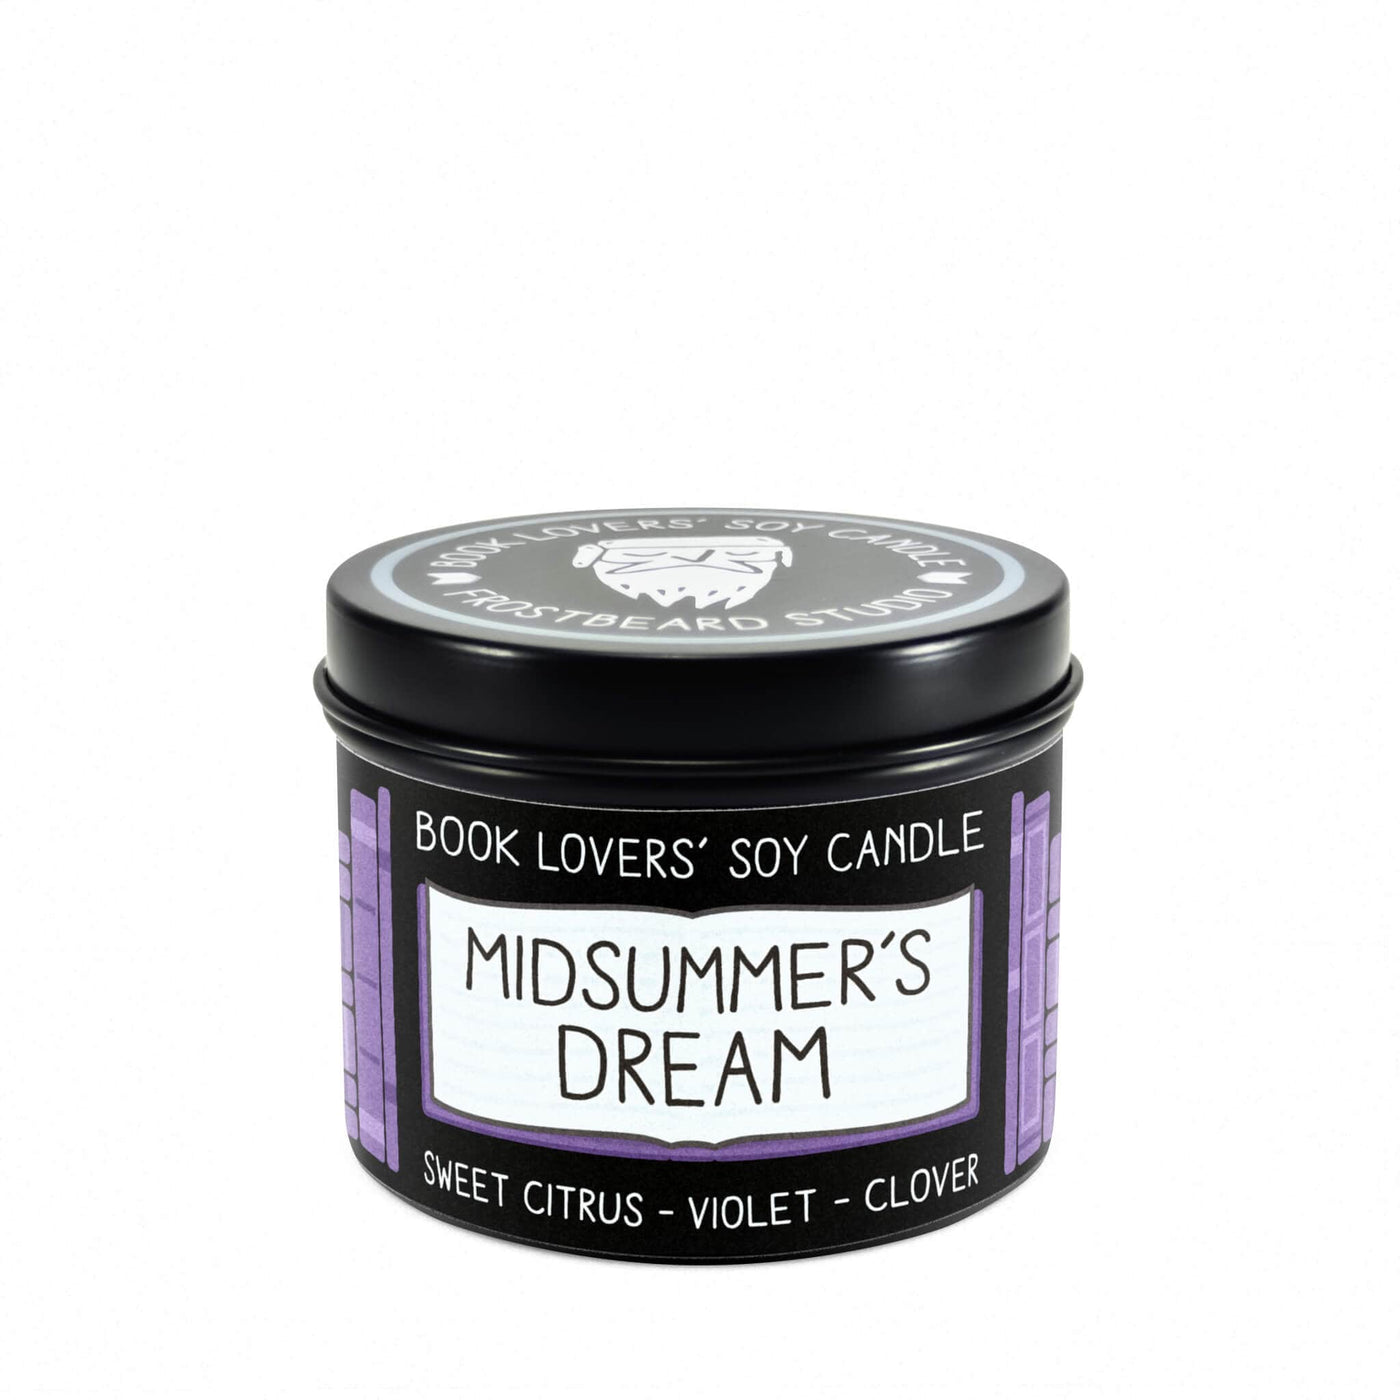 Midsummer's Dream  -  4 oz Tin  -  Book Lovers' Soy Candle  -  Frostbeard Studio